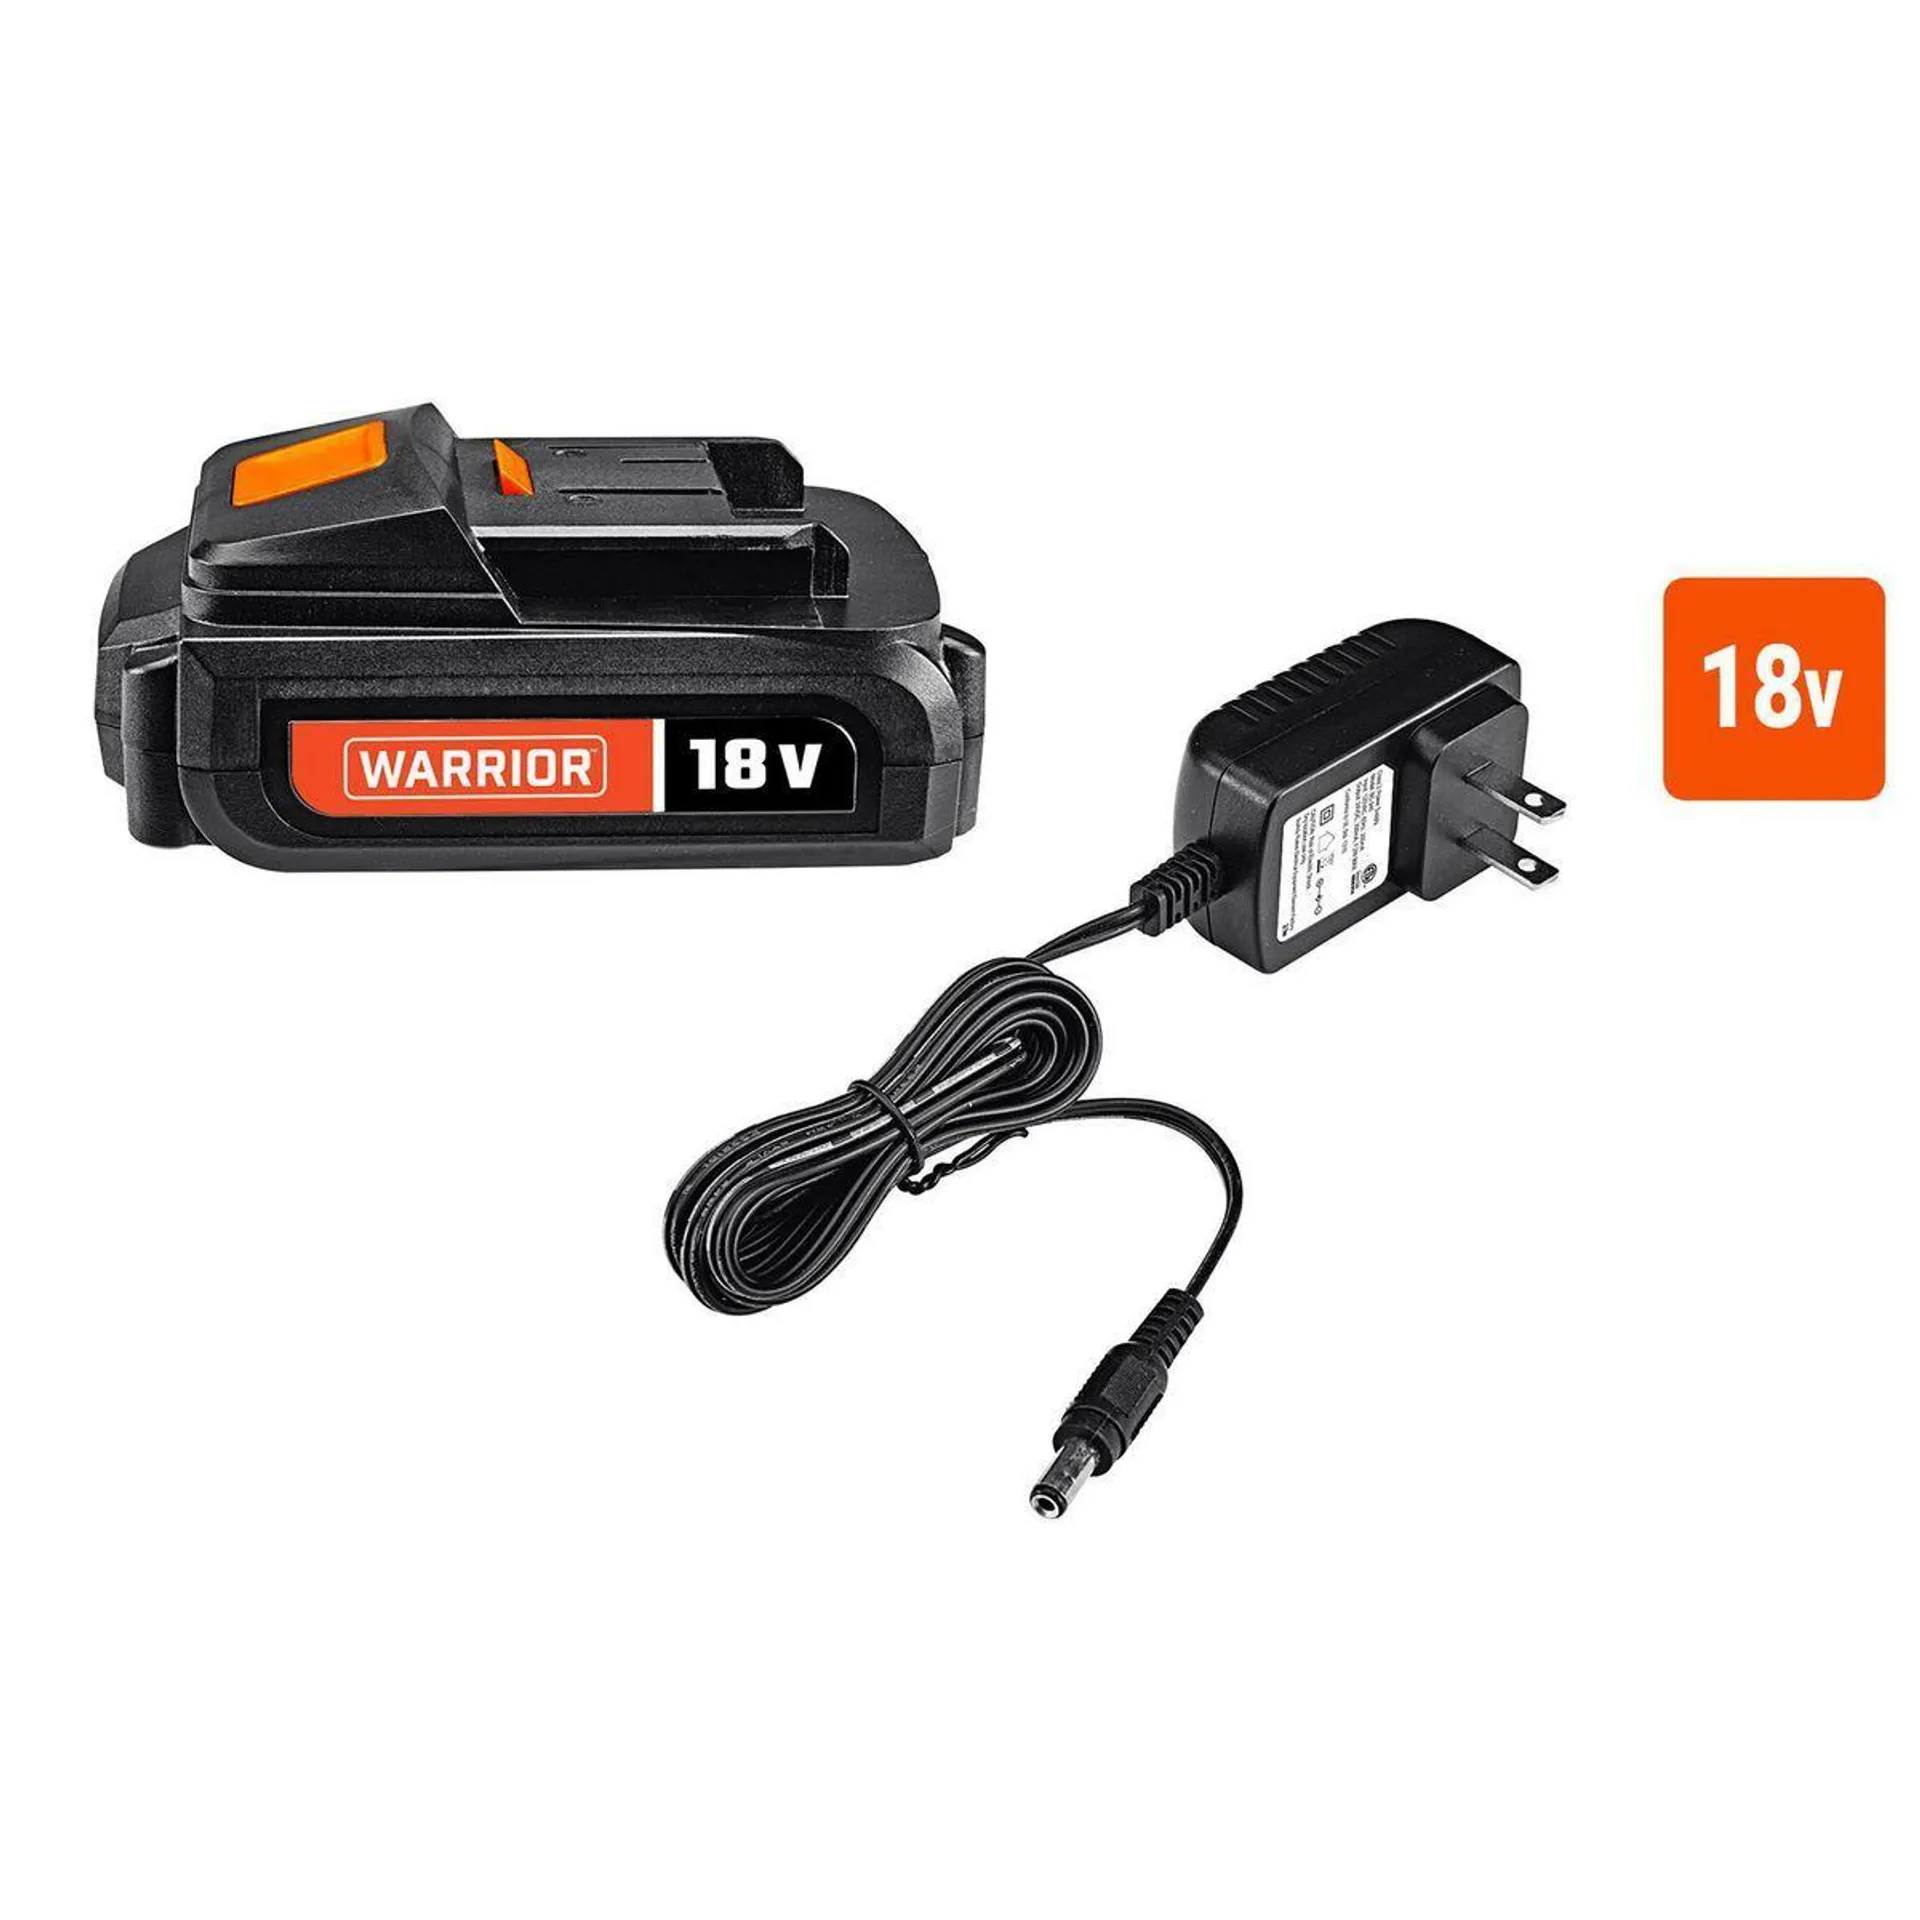 WARRIOR 18V Lithium Battery with Charger